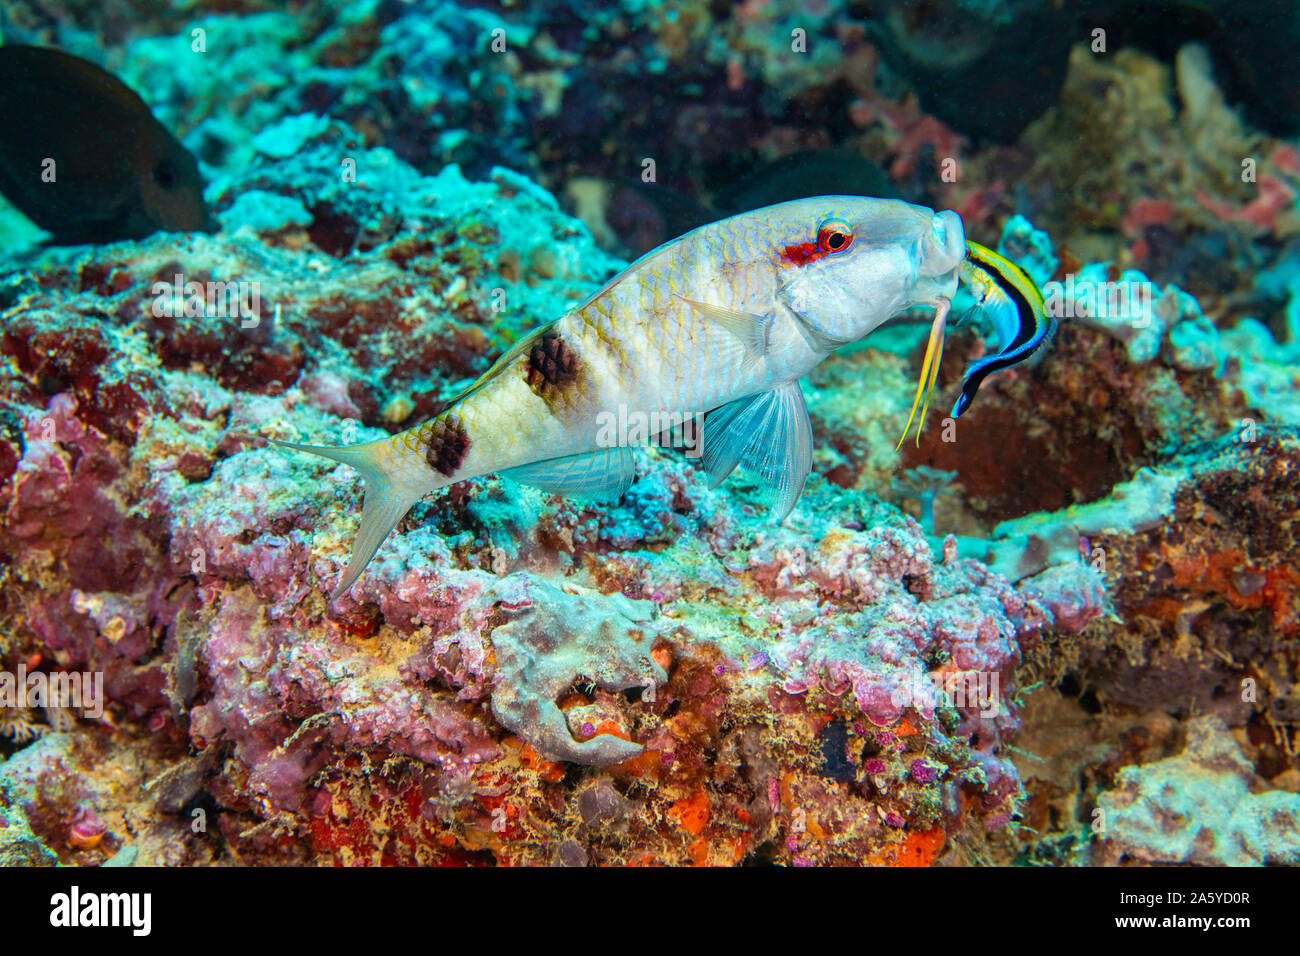 This manybar goatfish, Parupeneus multifasciatus, is opening wide to be inspected by a bluestreak cleaner wrasse, Labroides dimidiatus, on a reef off Stock Photo